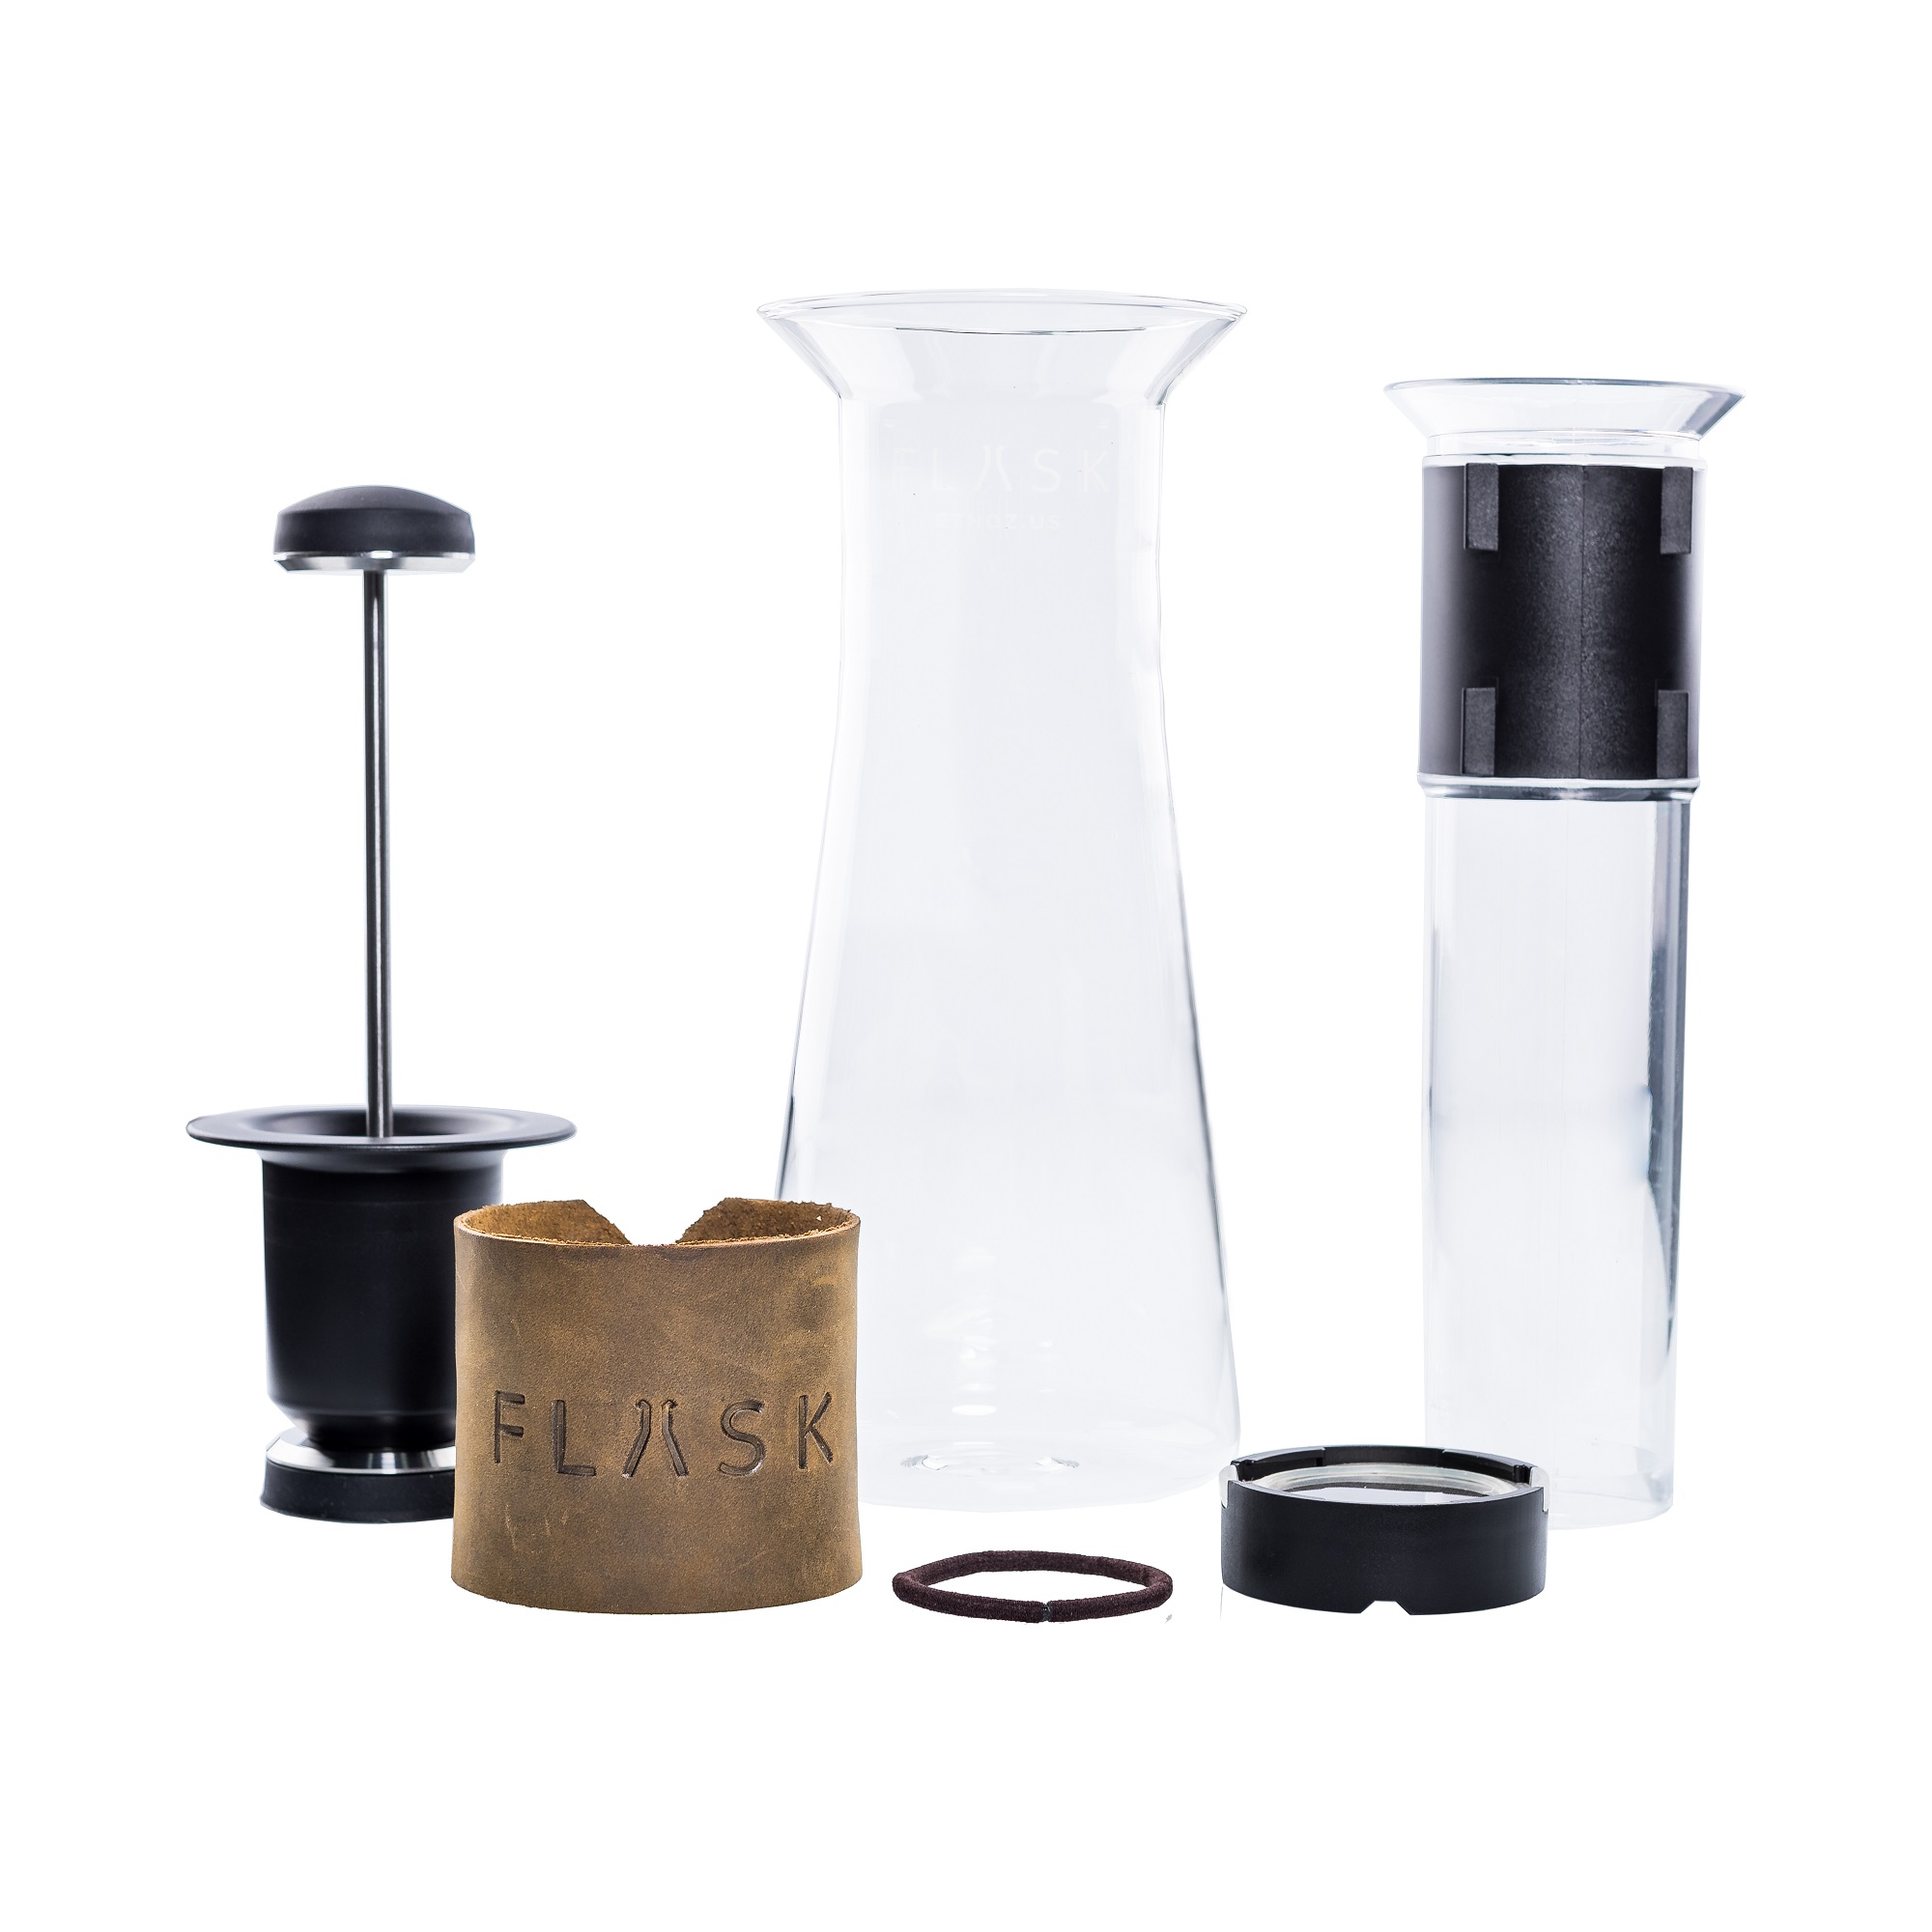 Brewing your coffee in this travel thermos is easier than using a Nespresso  - Yanko Design